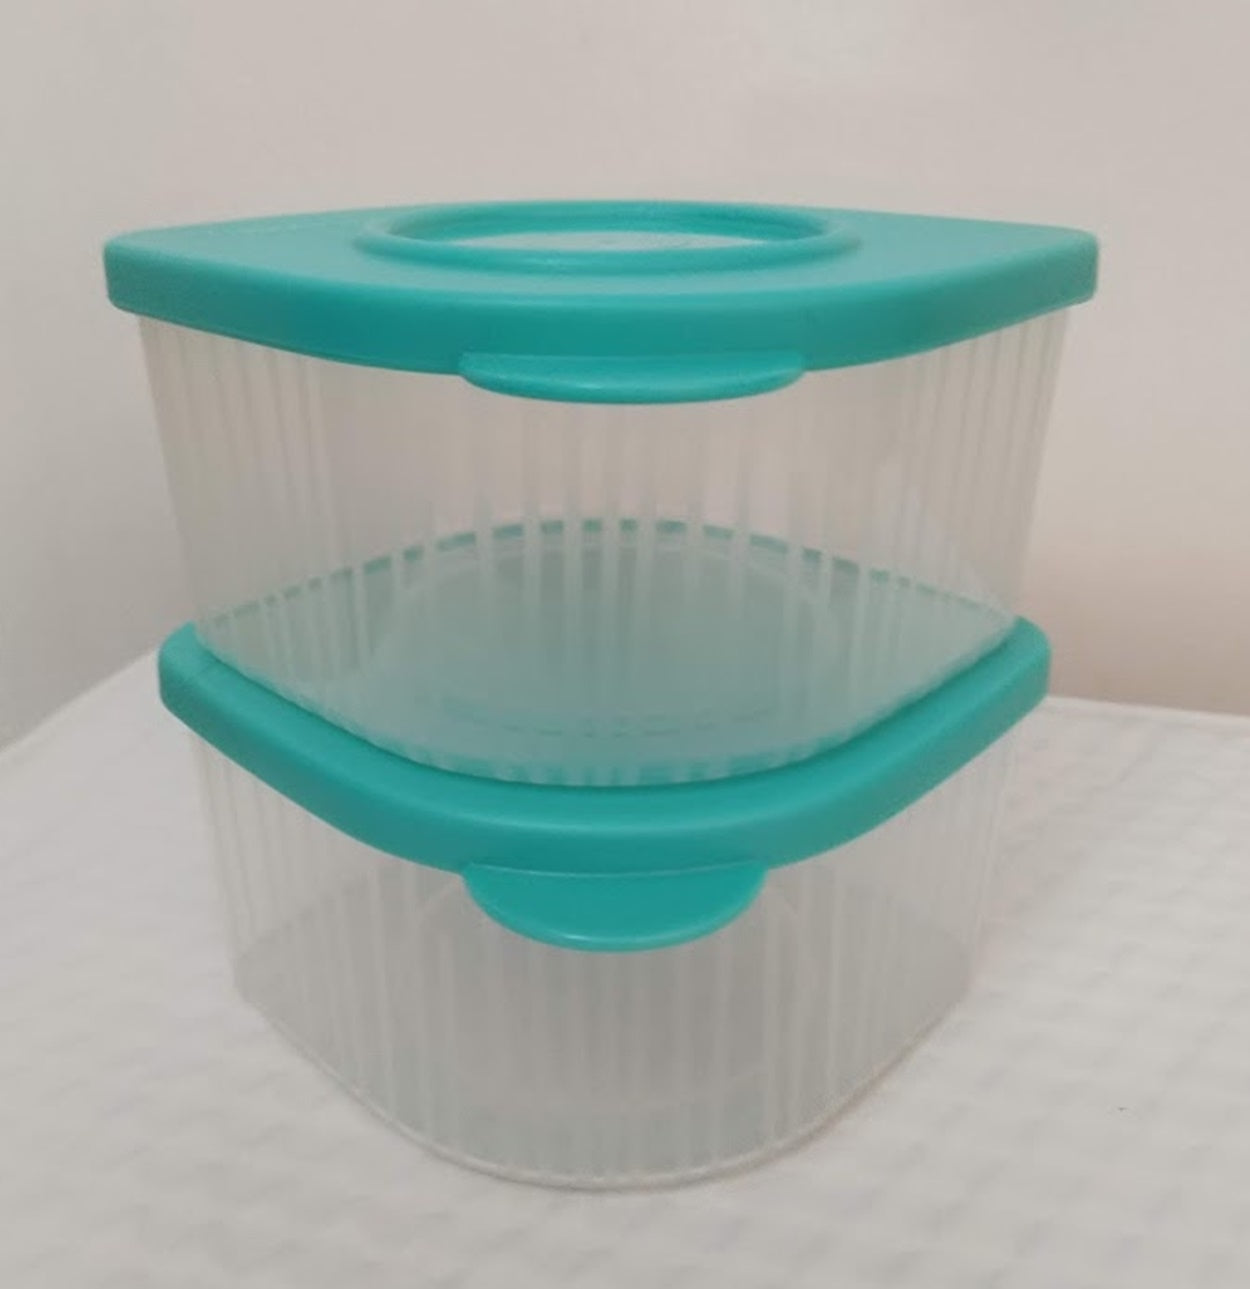 Tupperware 2 COLORED NOVELTY GADGET ROUND ROCKER CANISTER SCOOPS – Plastic  Glass and Wax ~ PGW